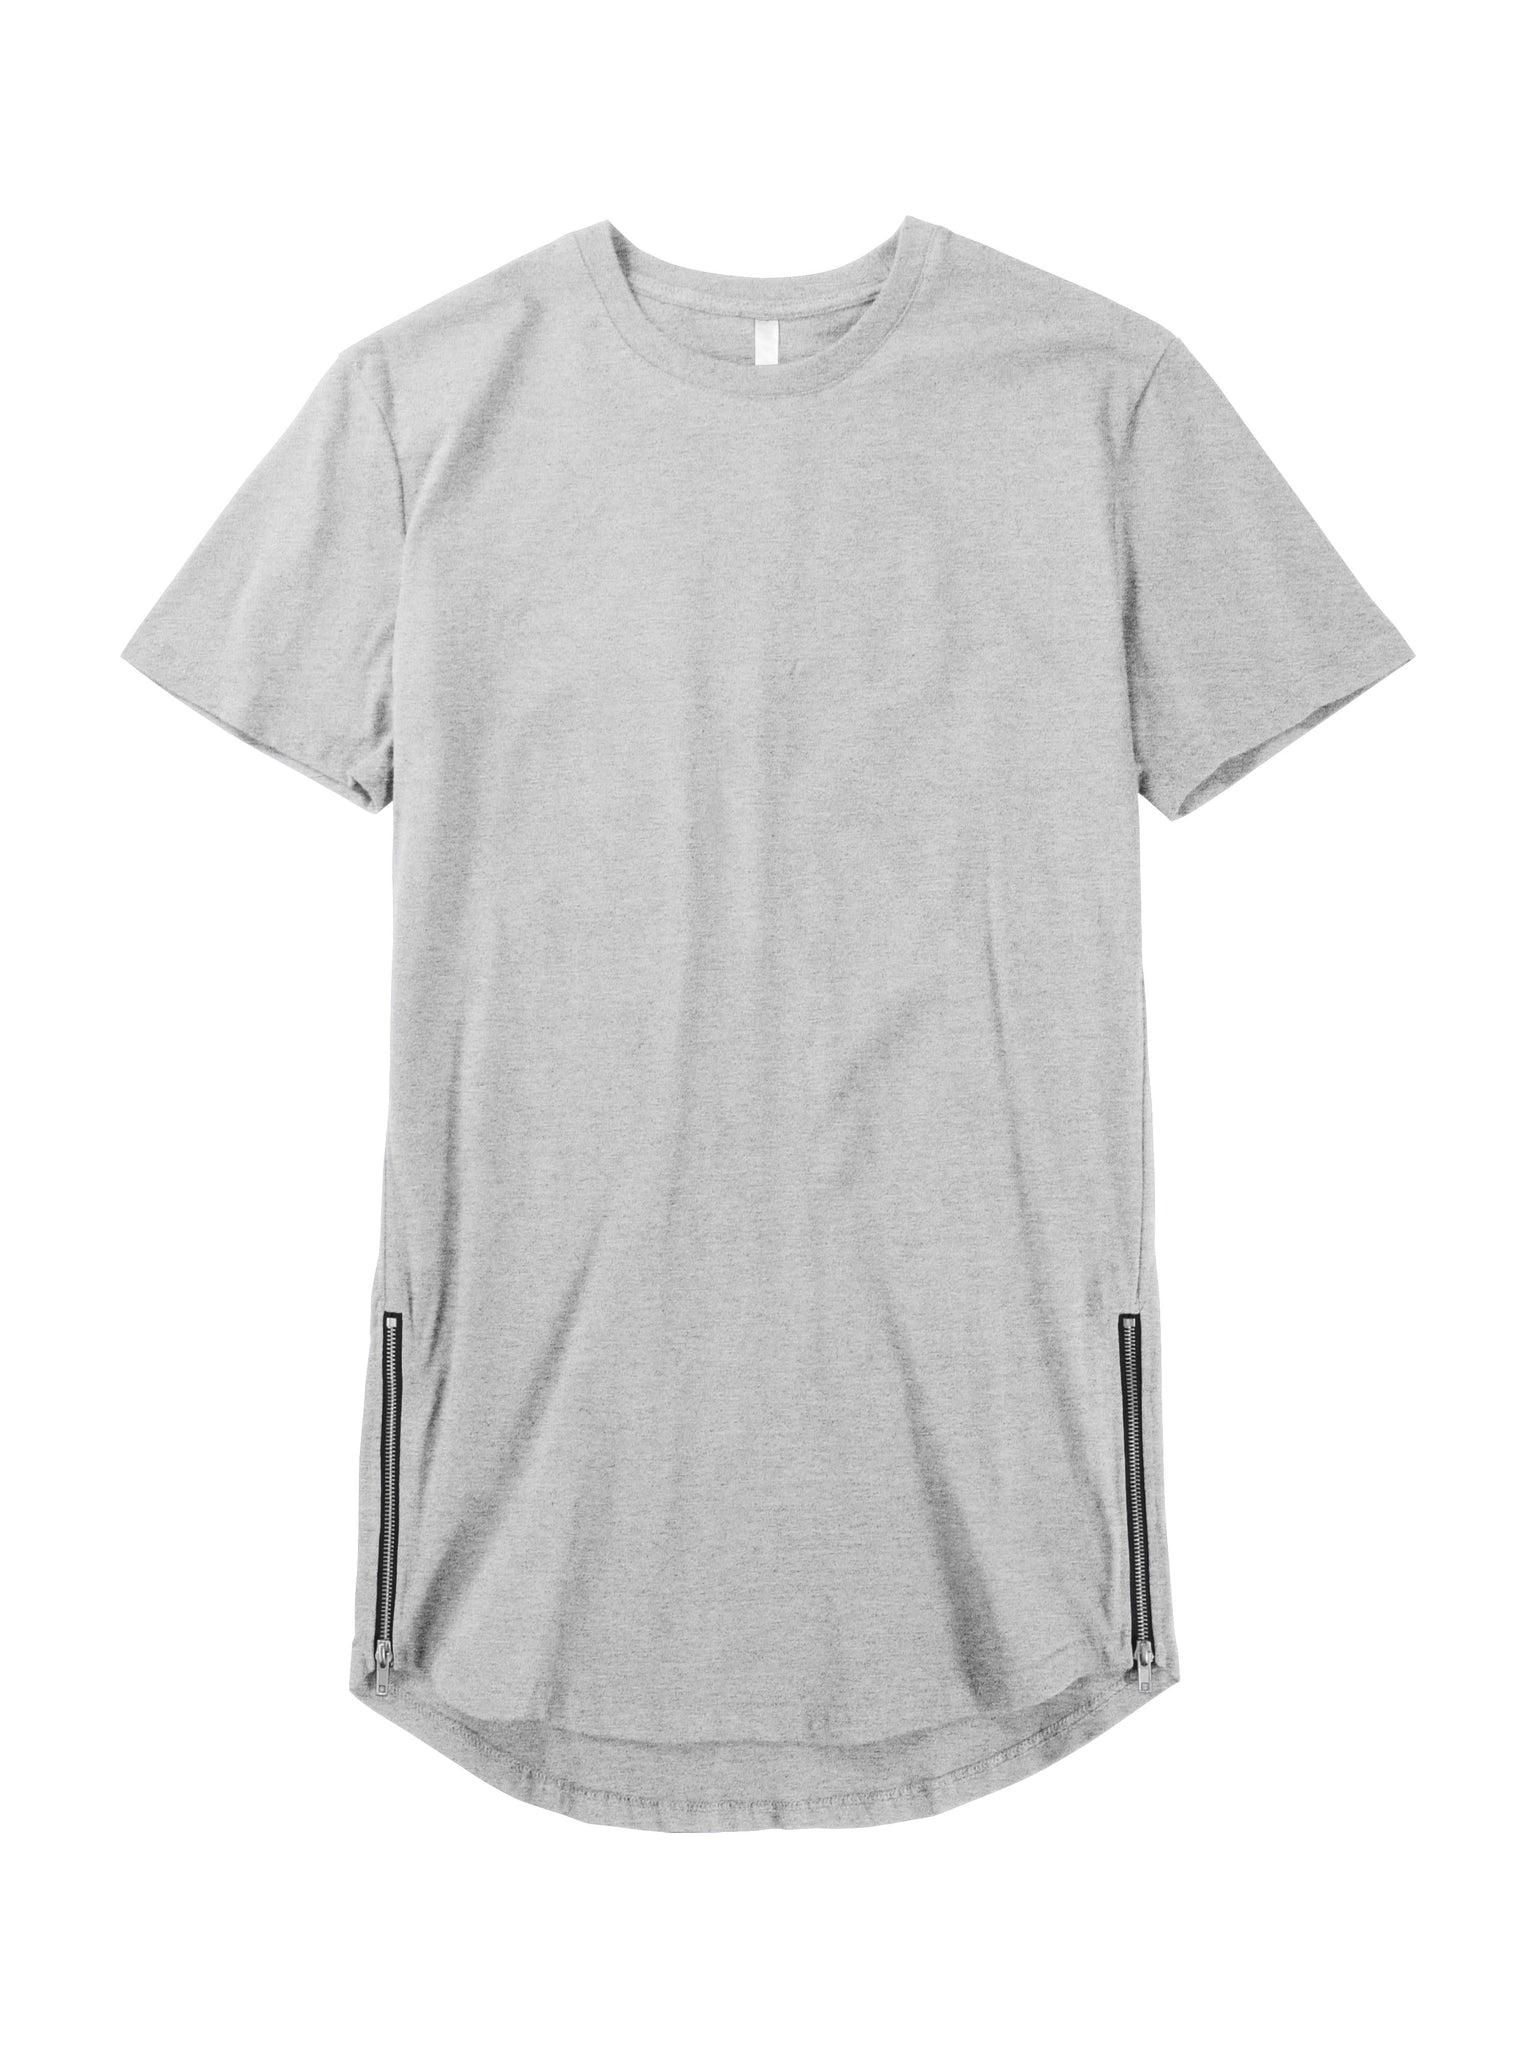 Longline & Zipper Premium | and Tank - Beyond Side with Hat Shirts Hipster T-Shirt T Mens Tops